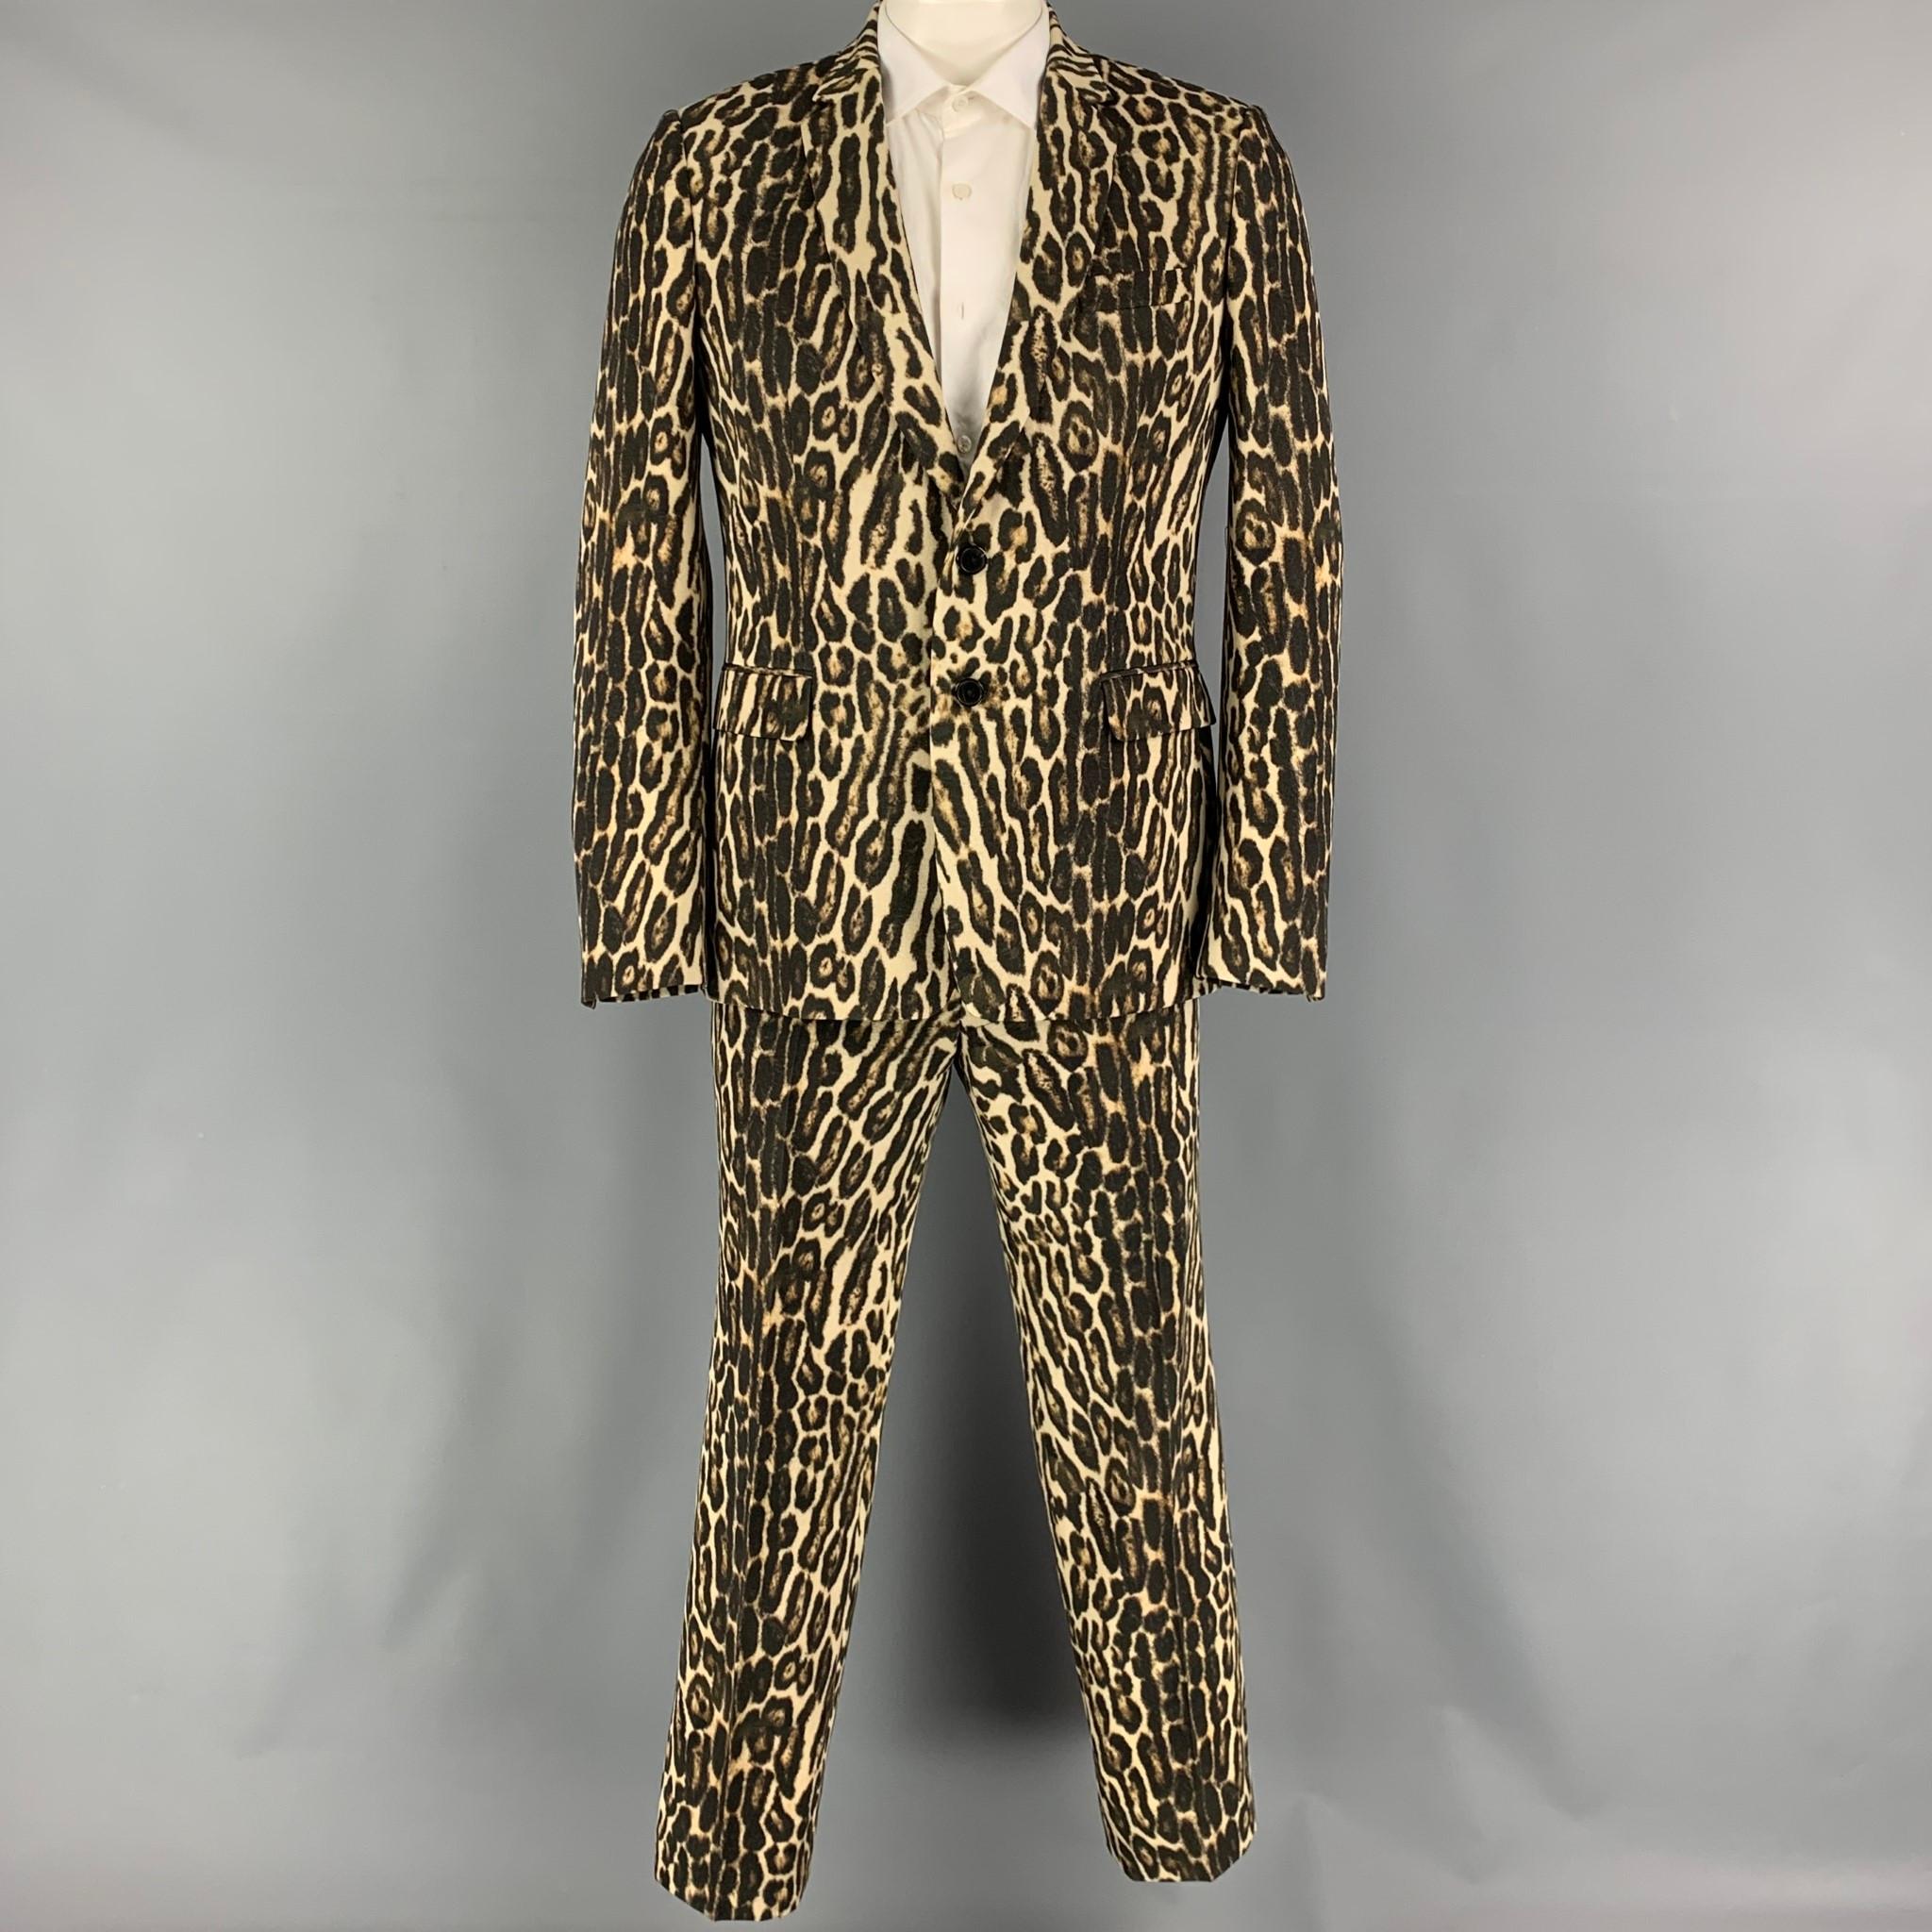 DRIES VAN NOTEN Spring-Summer 2020 suit comes in a brown and tan animal print wool woven material a full liner and includes a single breasted, double button sport coat with a notch lapel and matching flat front trousers.

Very Good Pre-Owned